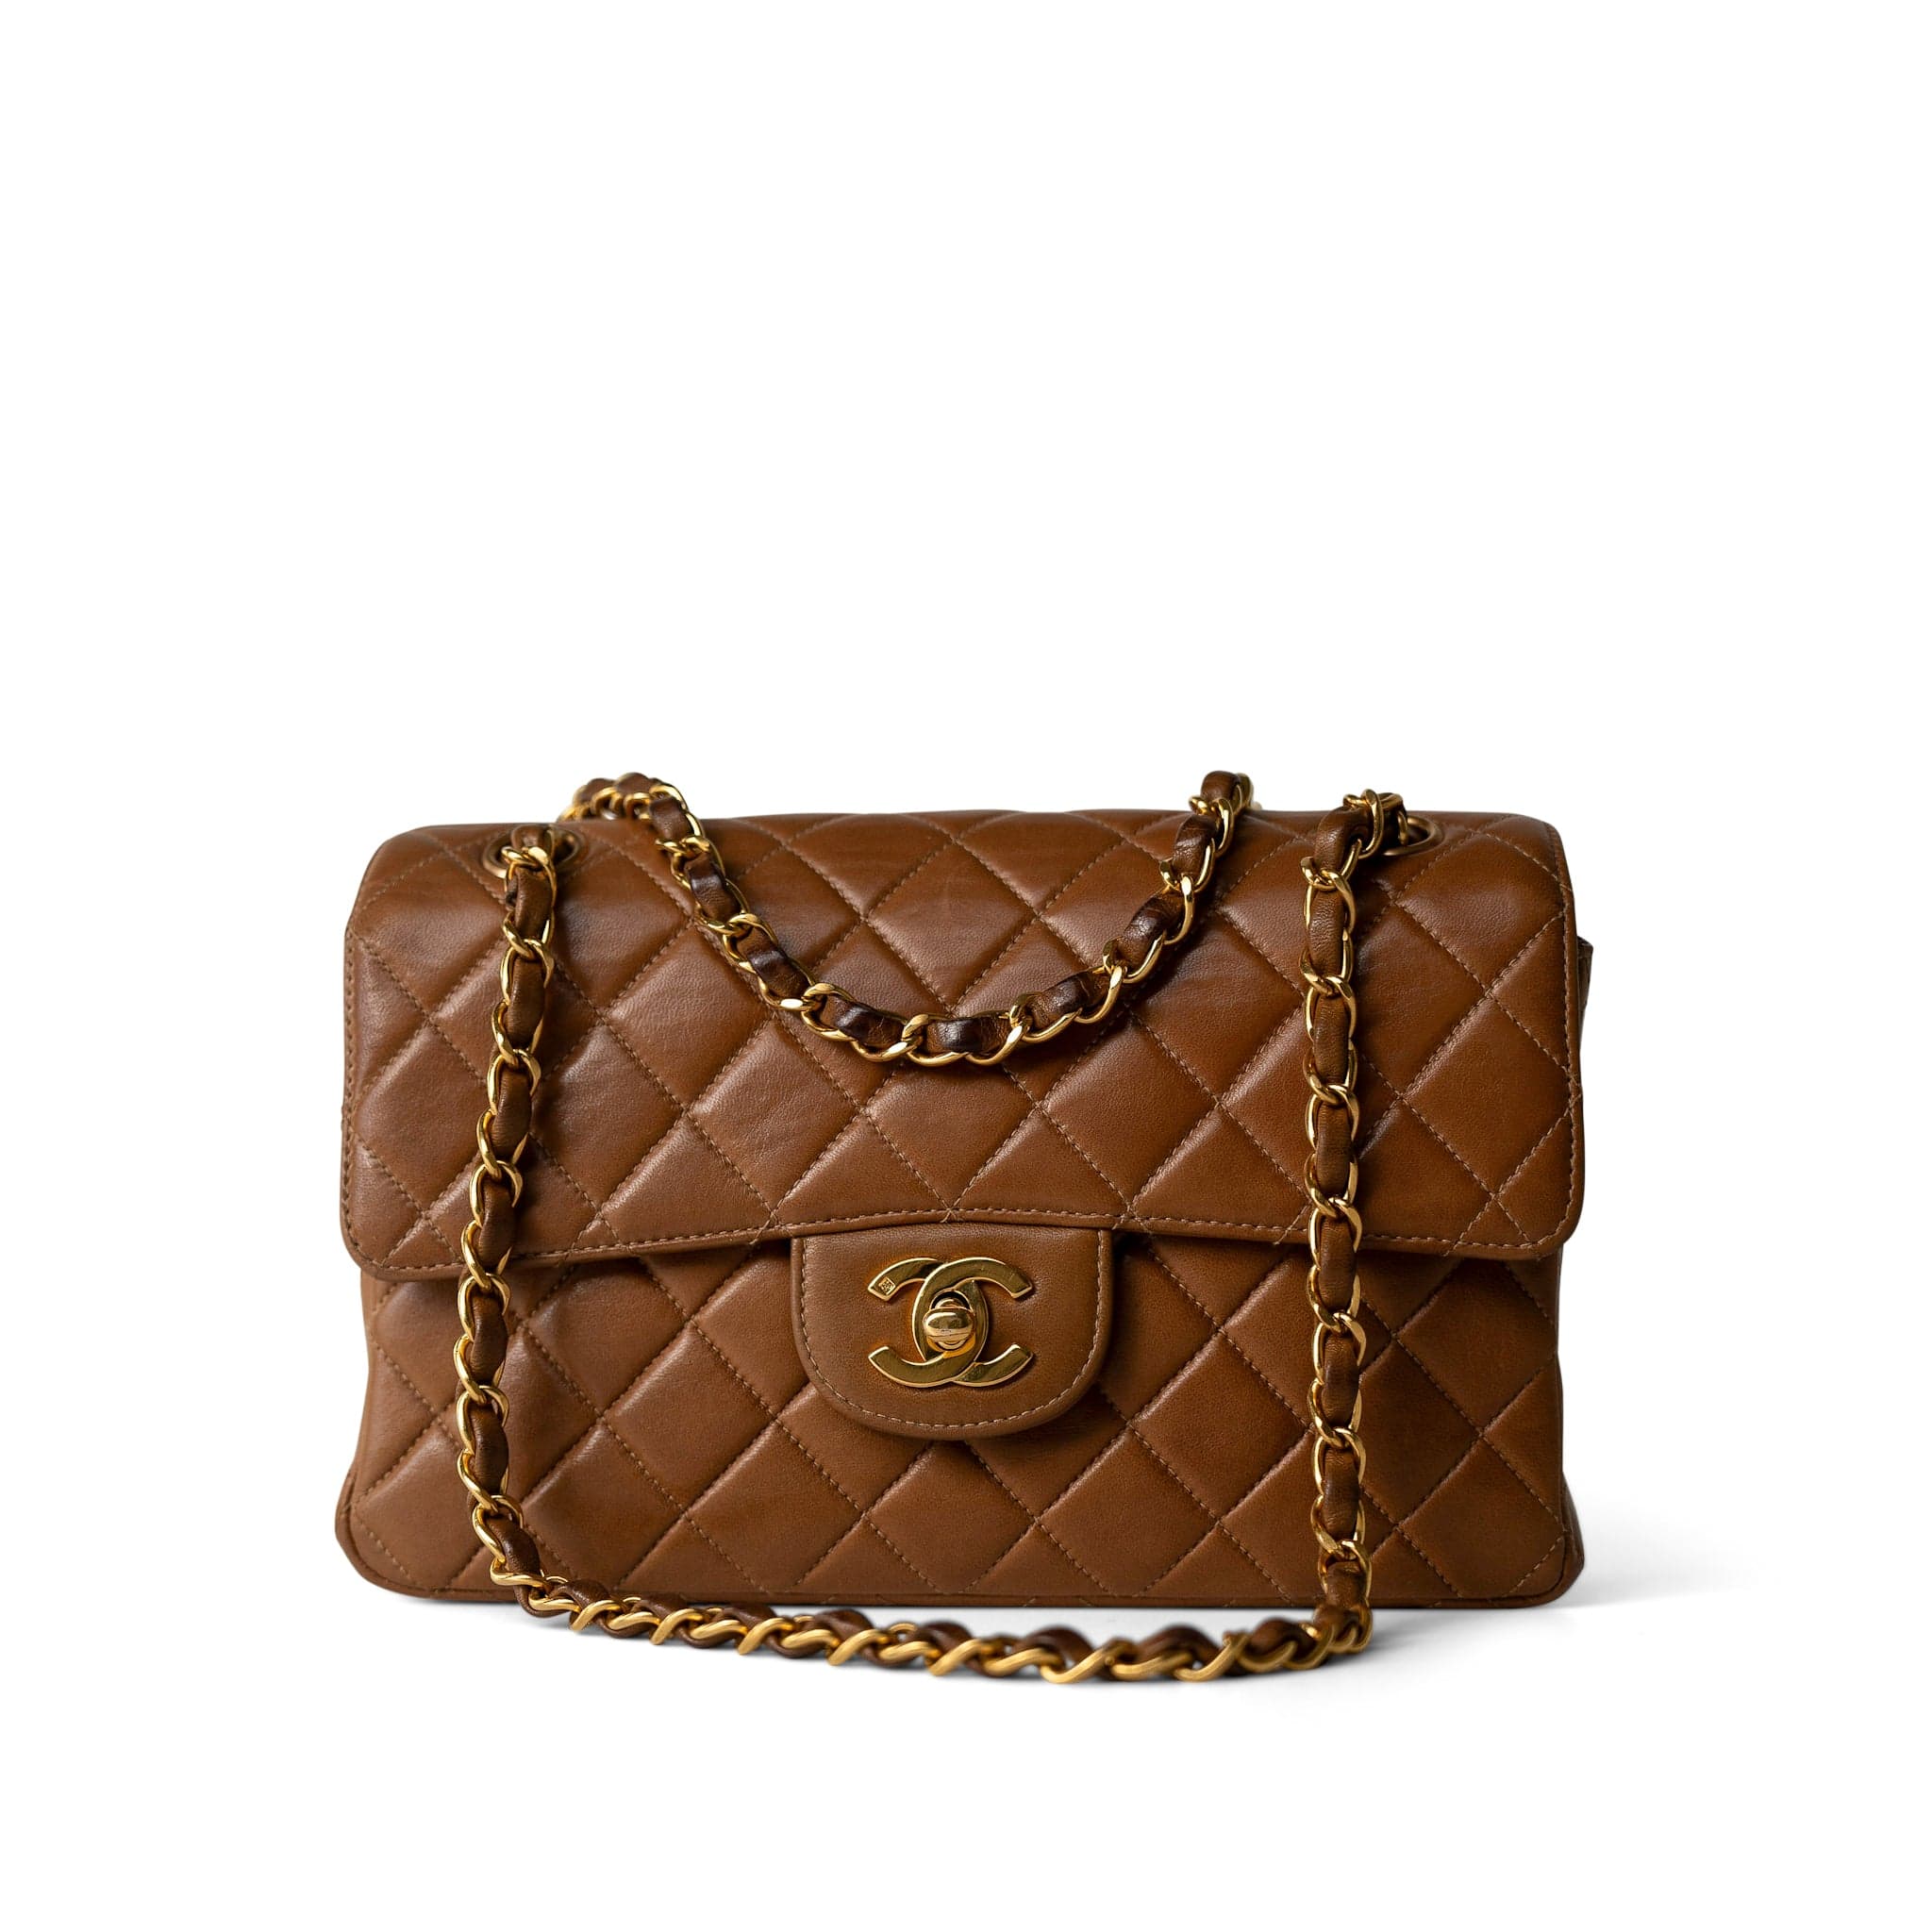 CHANEL Handbag Brown Brown Lambskin Double Faced Flap Bag Gold Hardware - Redeluxe